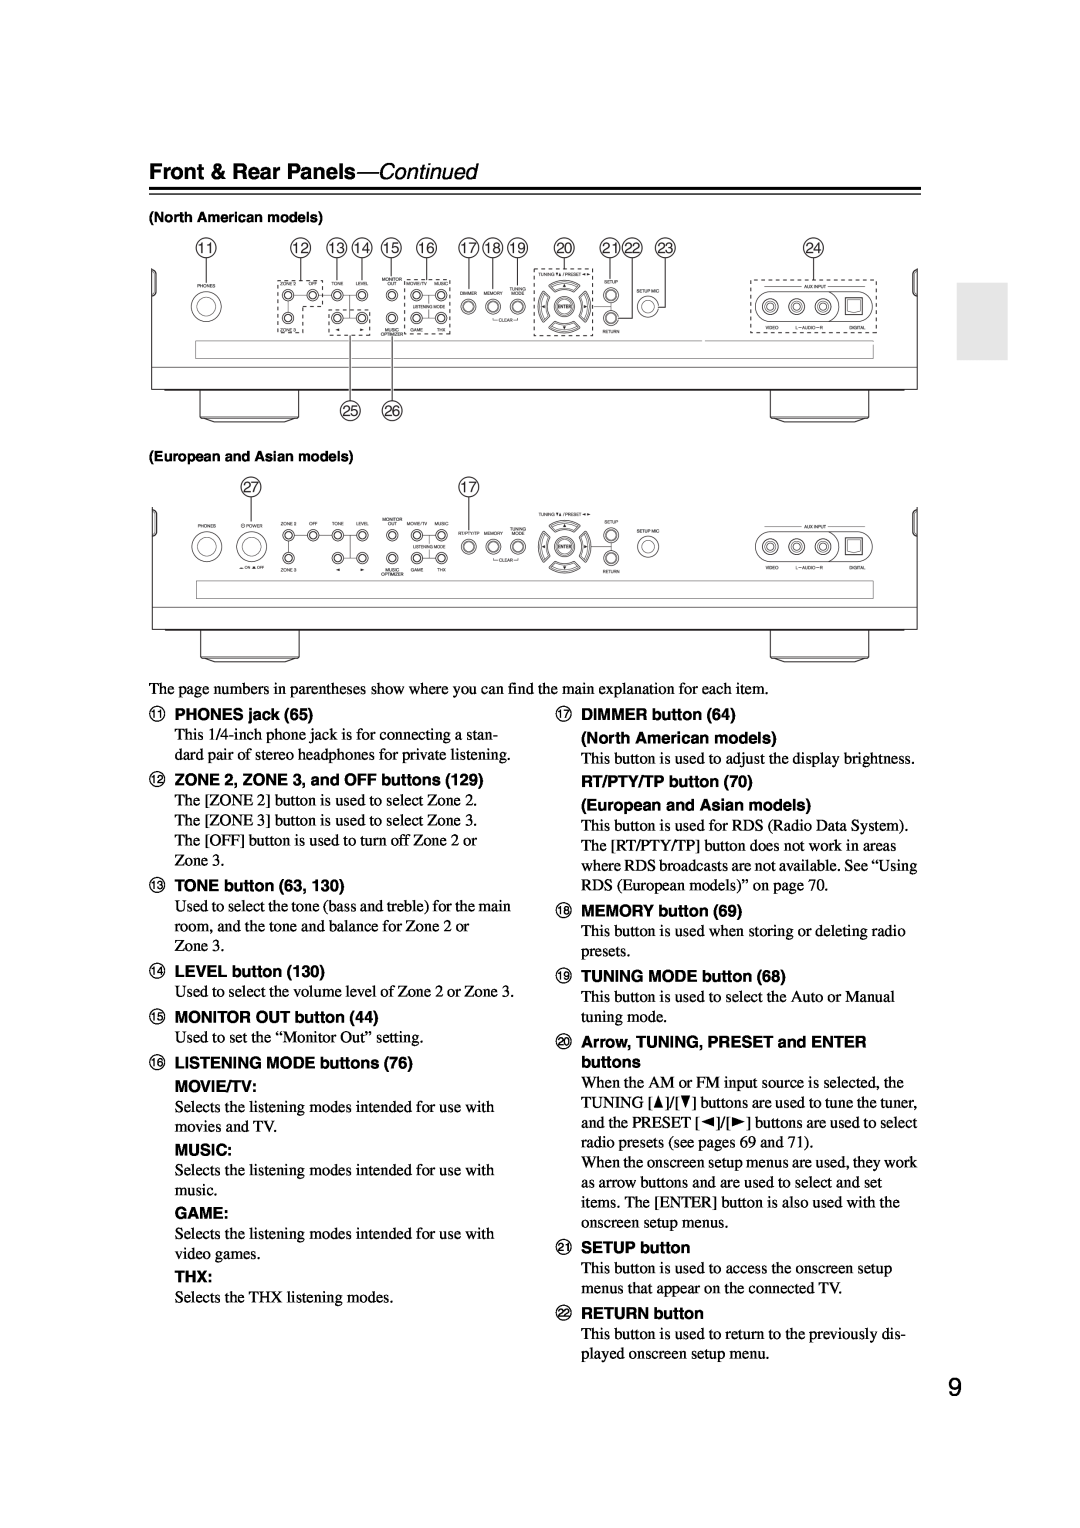 Onkyo TX-NR1007 instruction manual Front & Rear Panels—Continued, l mn o p qrs t uv w 